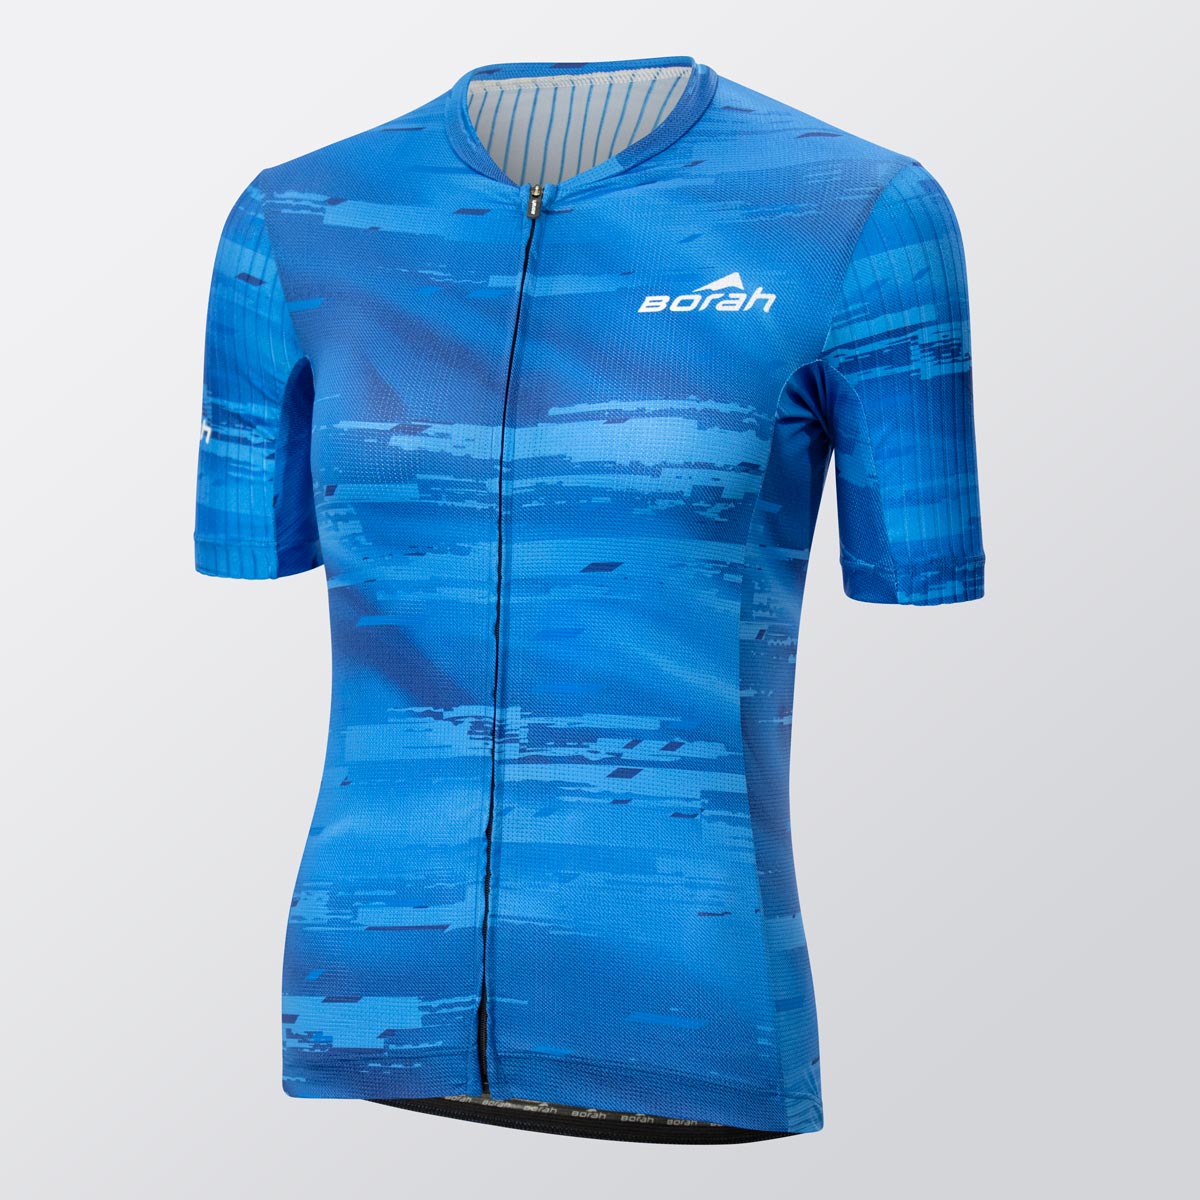 Women's OTW Spark Cycling Jersey front view.